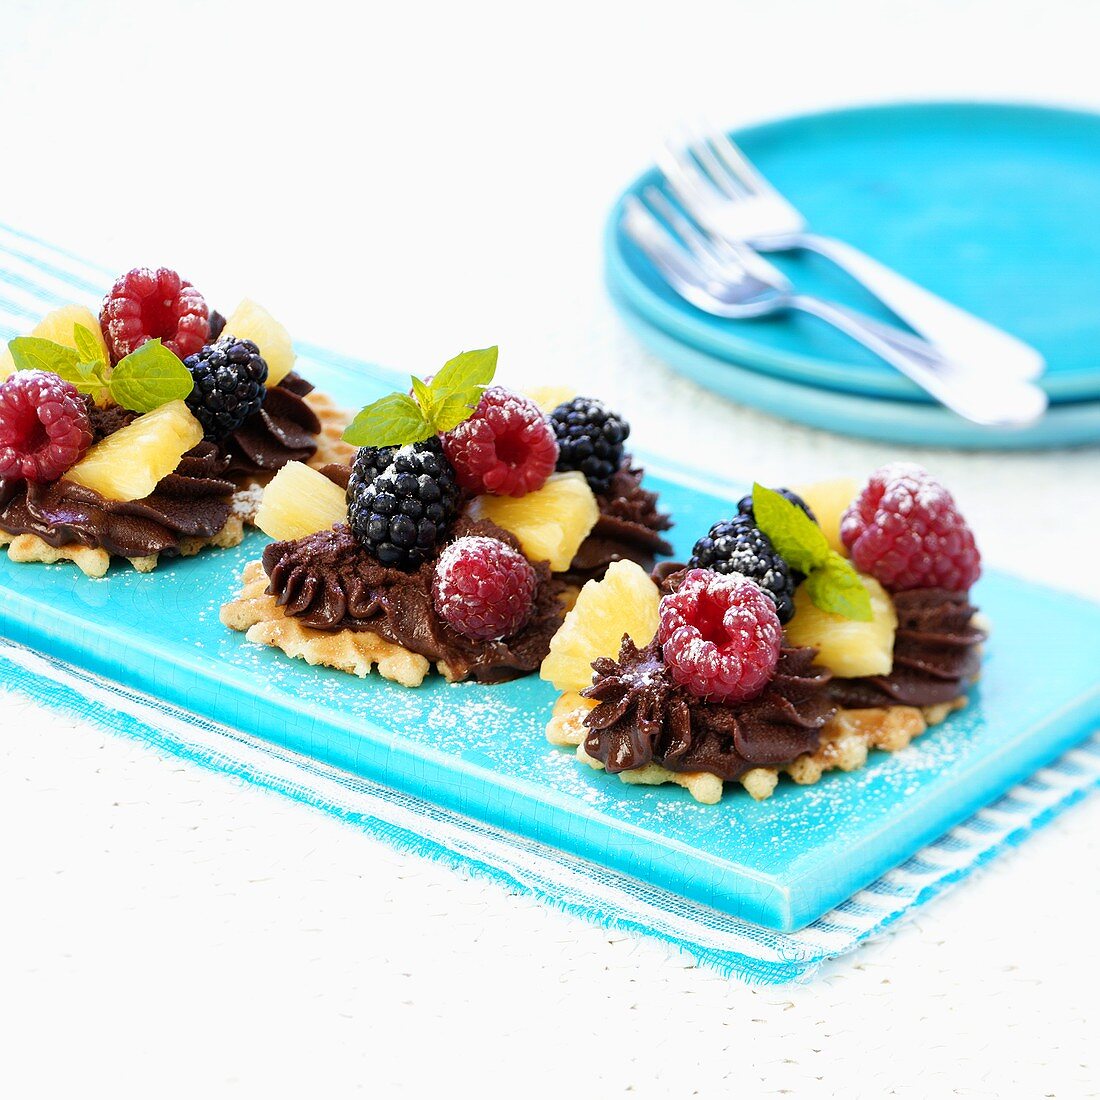 Waffle biscuits topped with chocolate cream and fruit